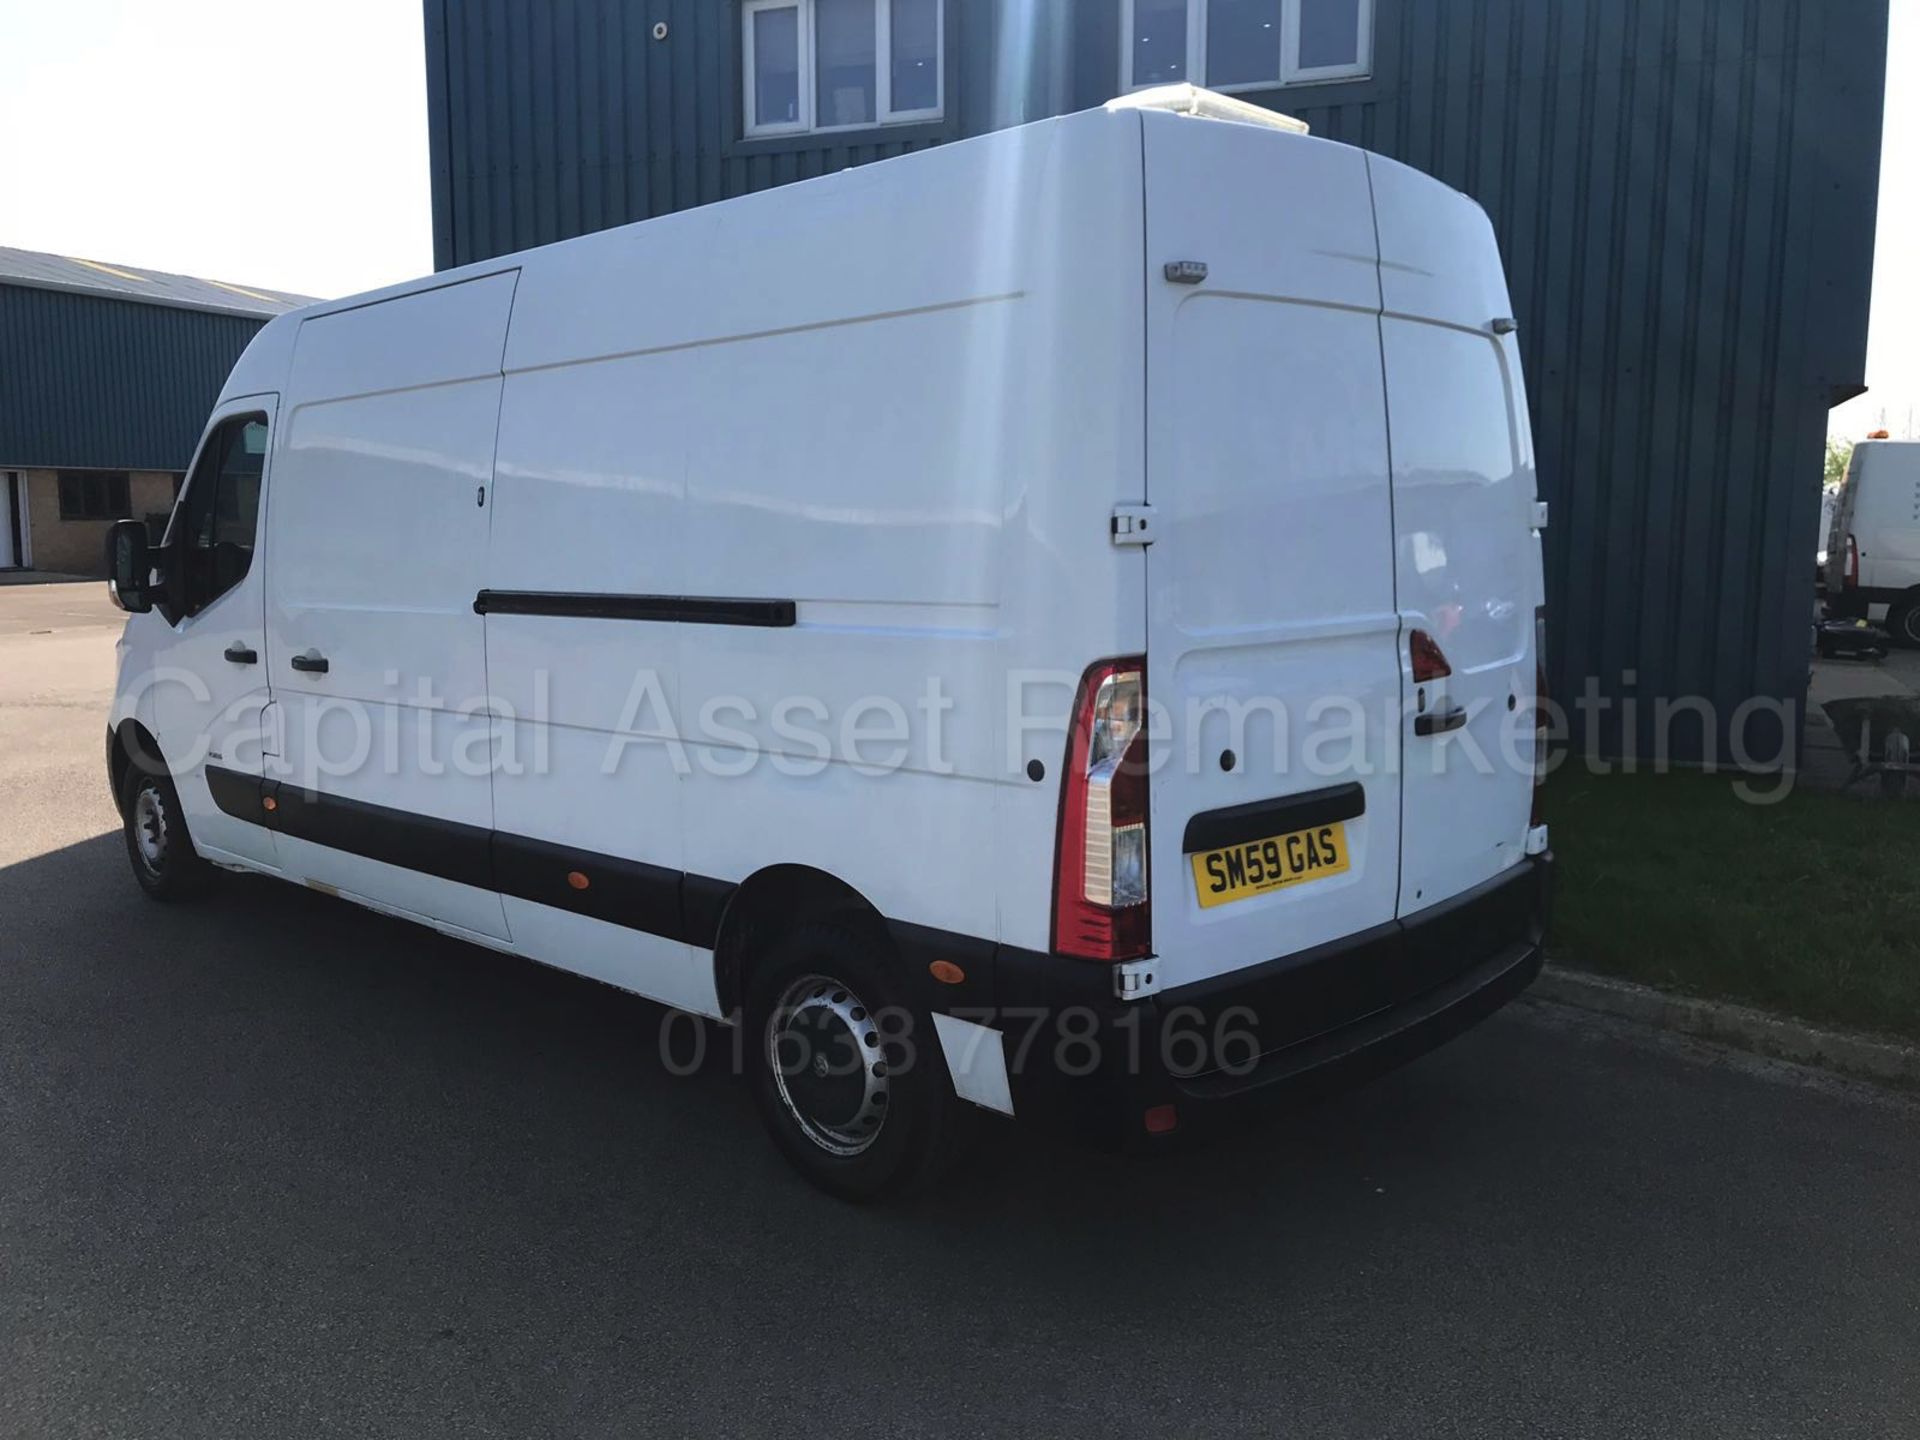 (On Sale) VAUXHALL MOVANO F3500 'LWB HI-ROOF' (2013 MODEL) '2.3 CDTI - 125 BHP - 6 SPEED' *AIR CON* - Image 7 of 21